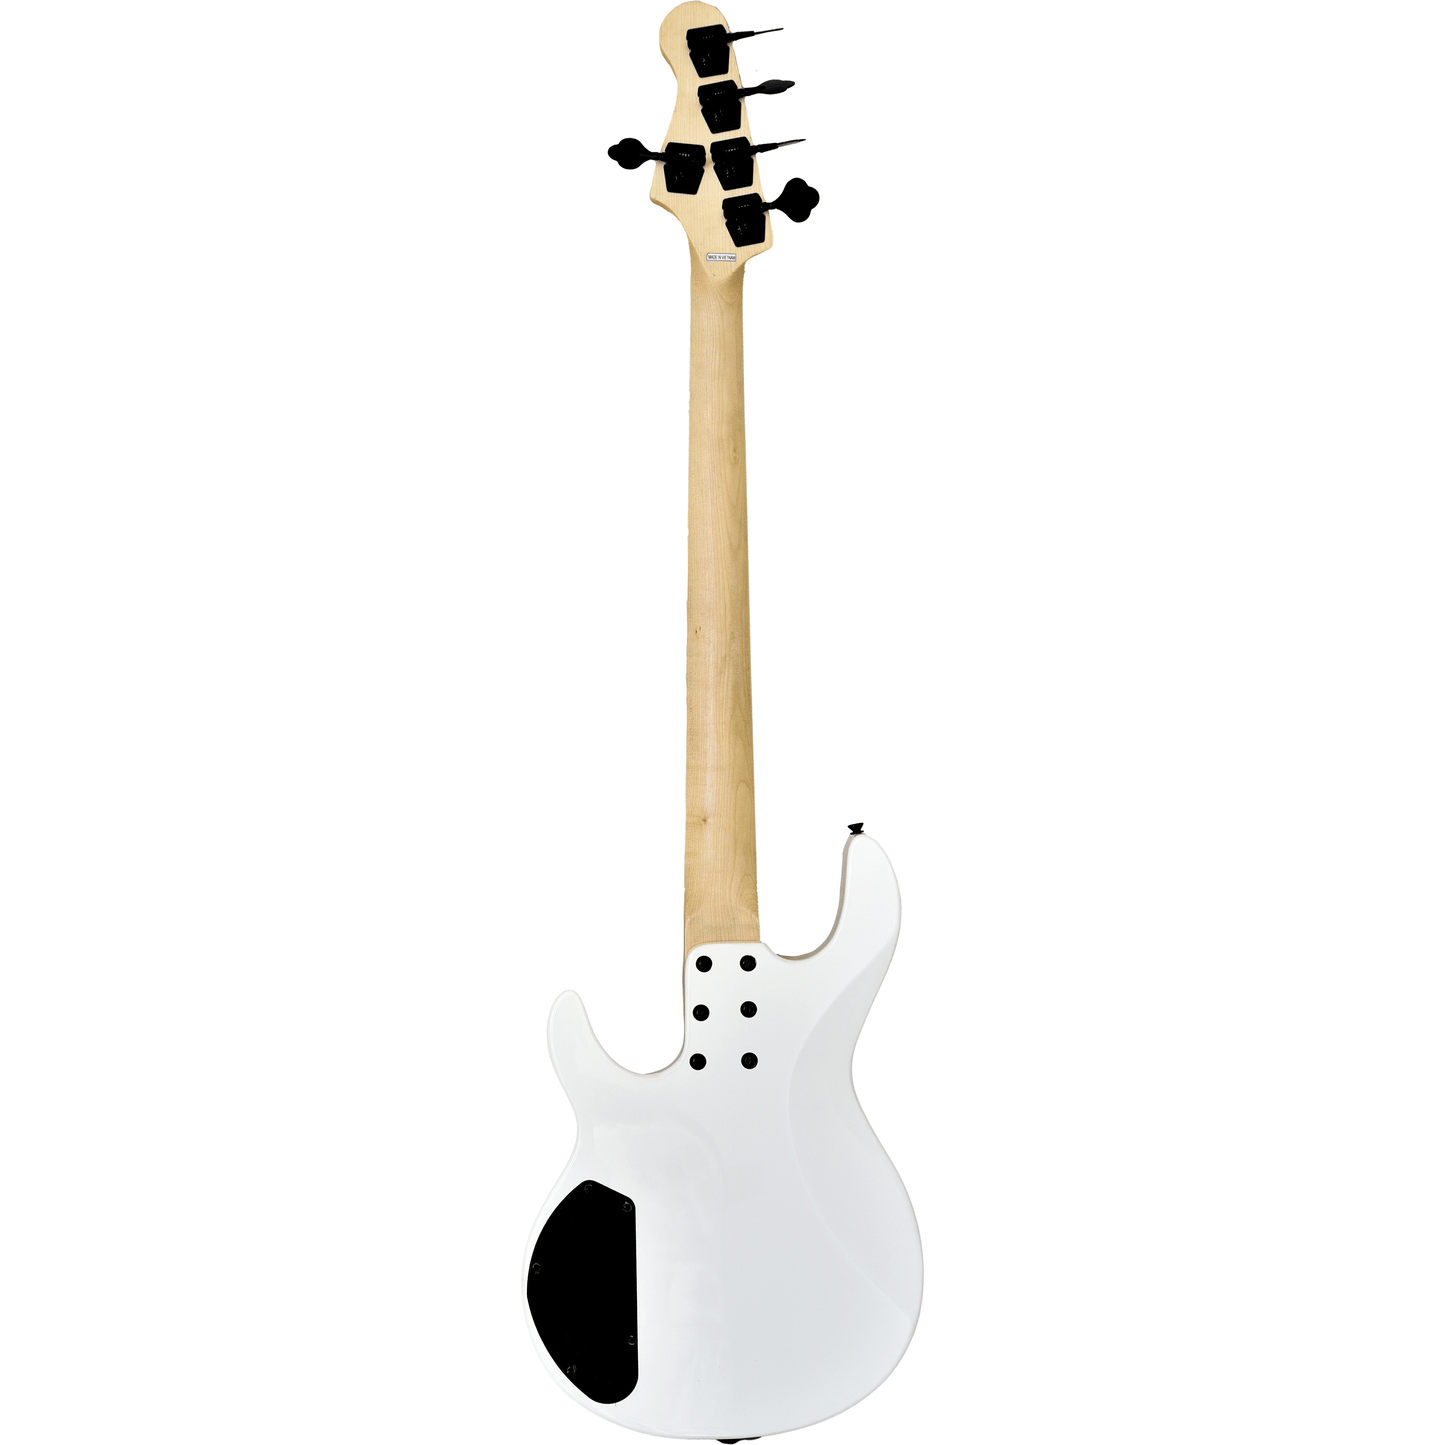 Moonray-5 Arctic White Left or Right Hand With Wolf Hard Case and Pro-Luthier Set Up